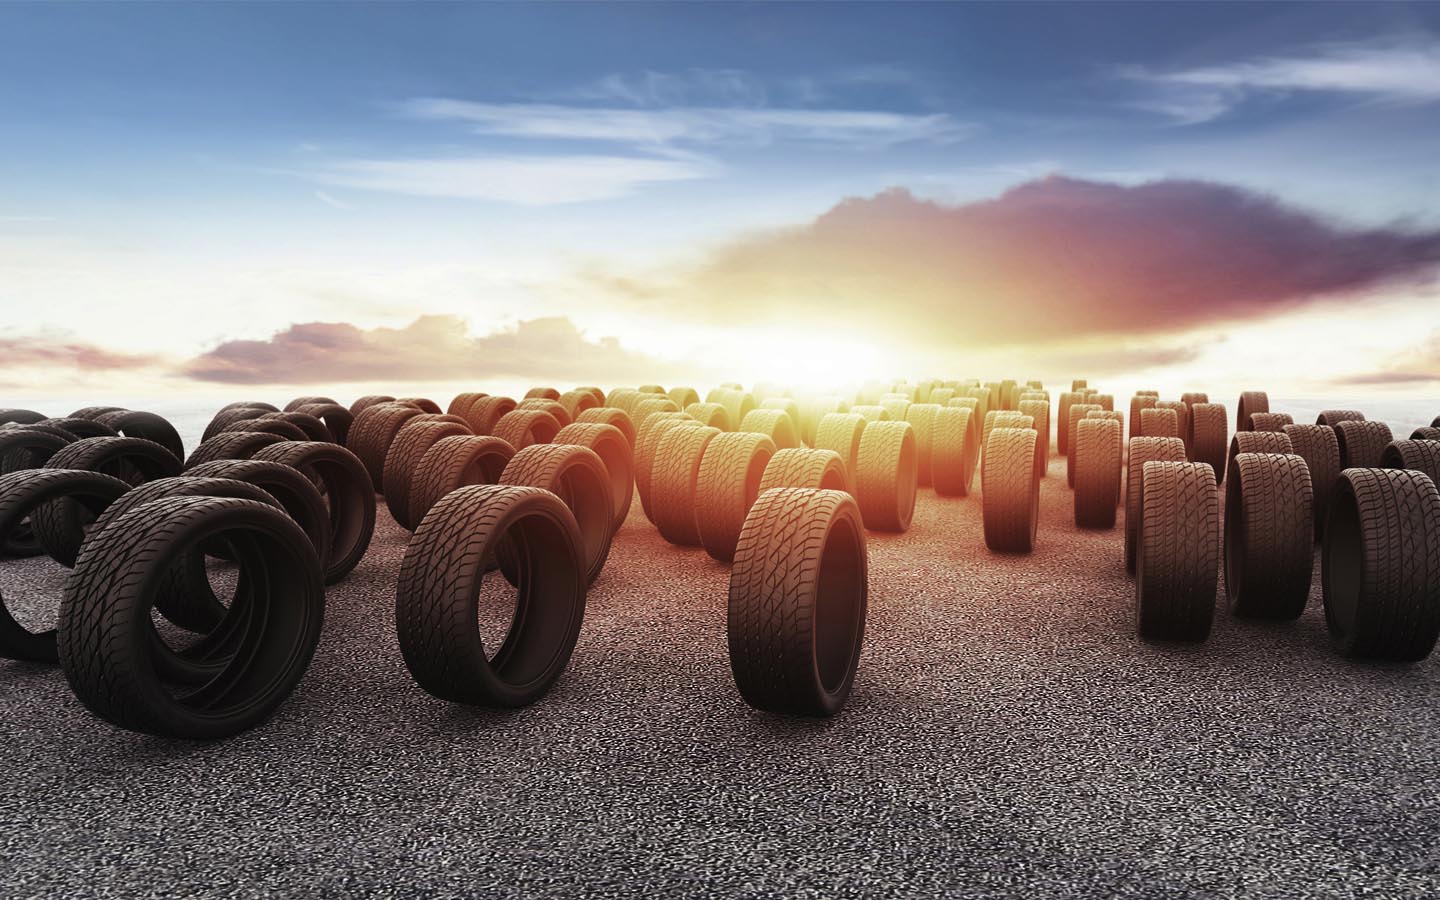 evolution of car tyres: tyres on road